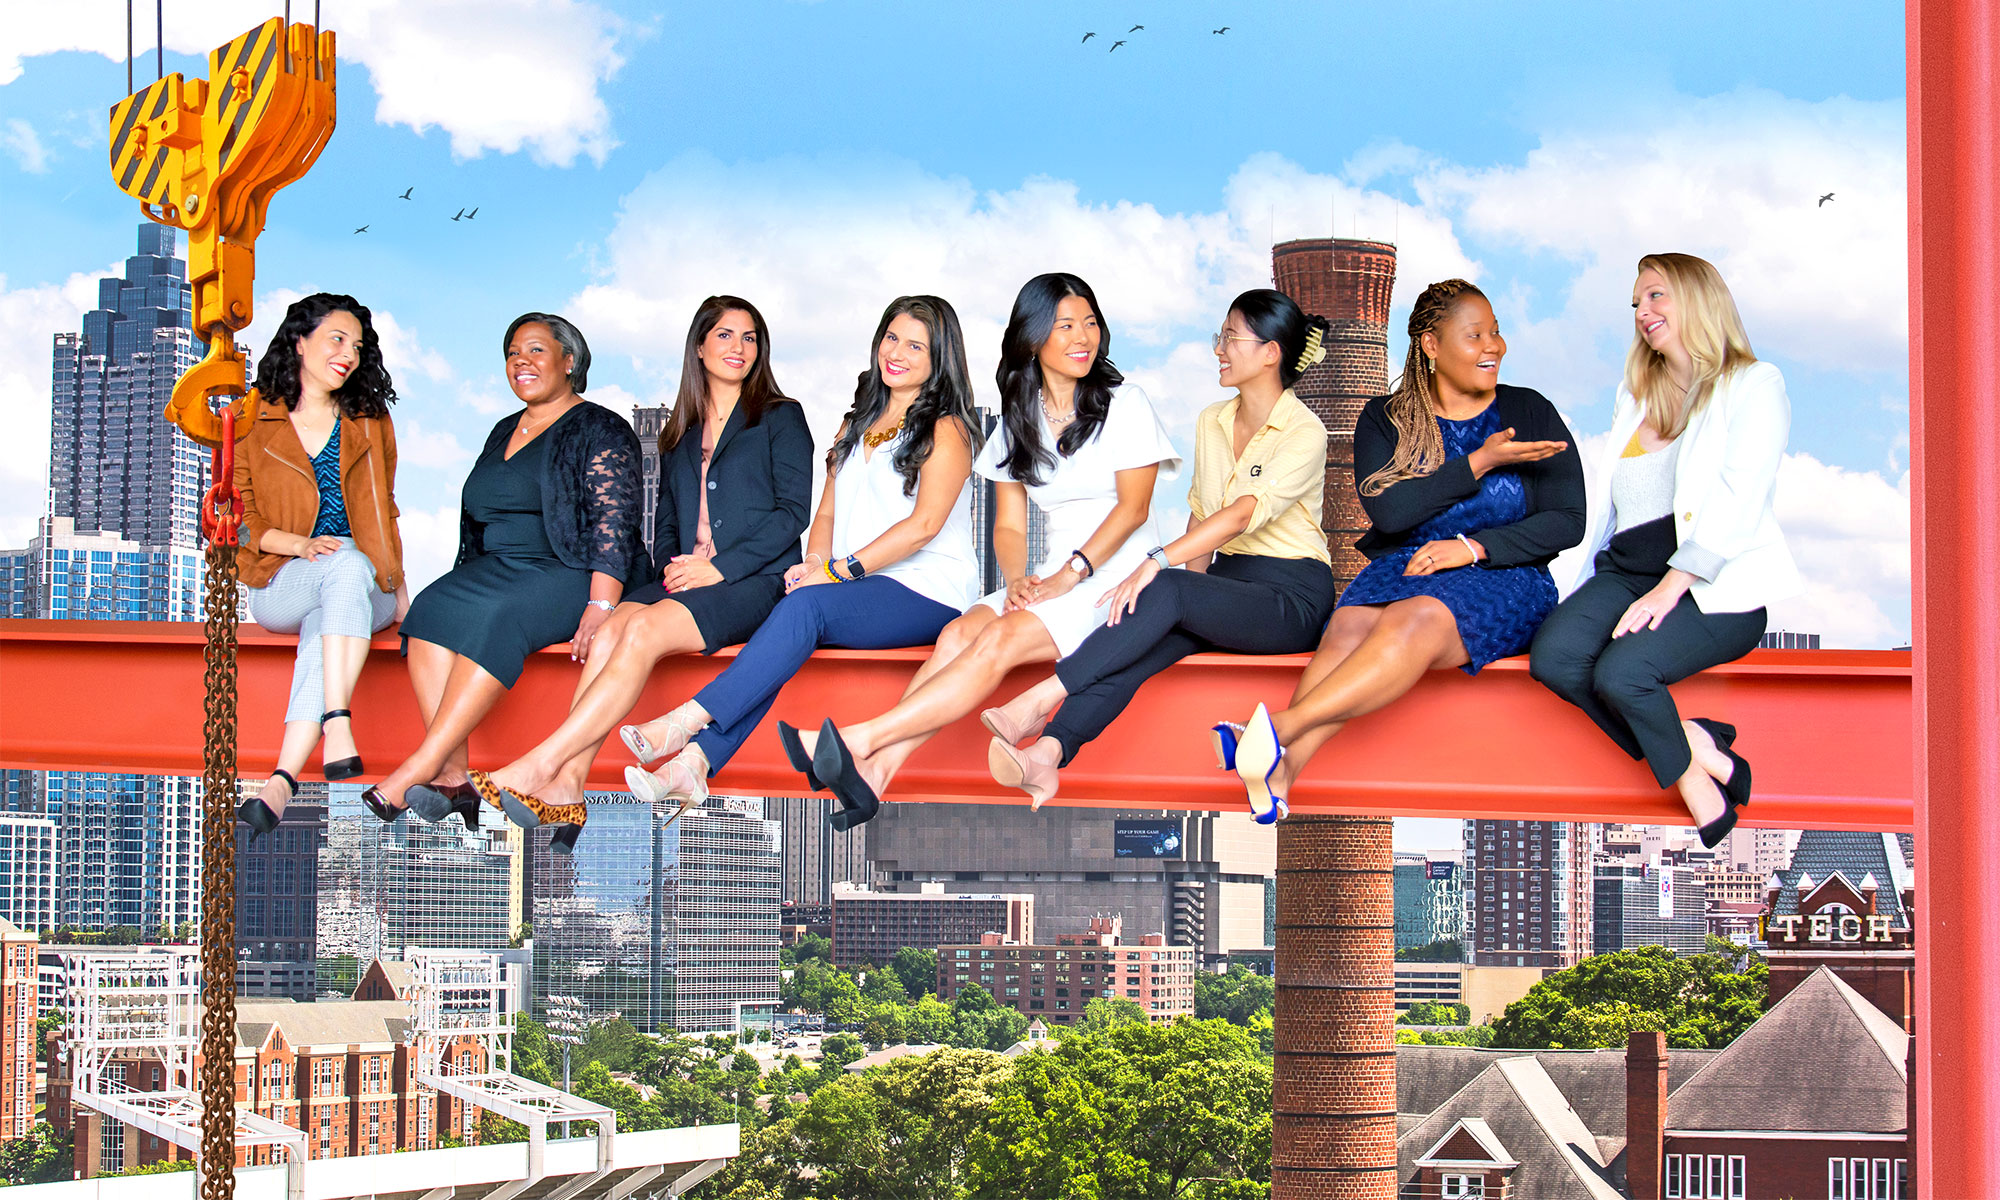 Photo collage of women faculty in the style of Lunch Atop a Skyscraper.